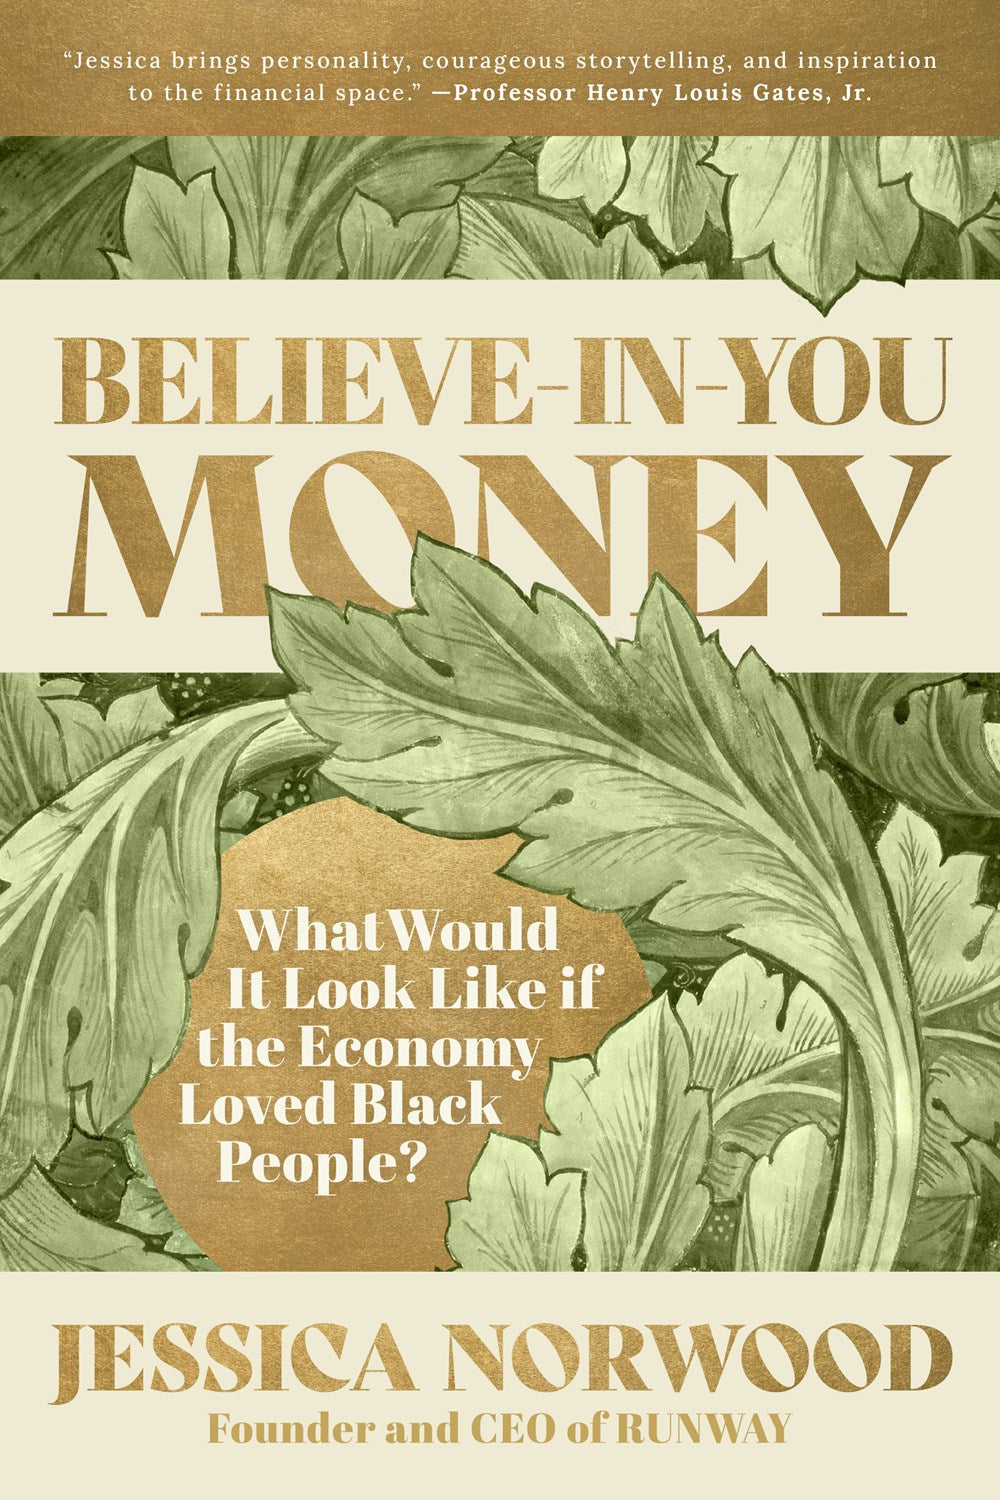 PRE-ORDER: Believe-in-You Money: What Would It Look Like If the Economy Loved Black People?